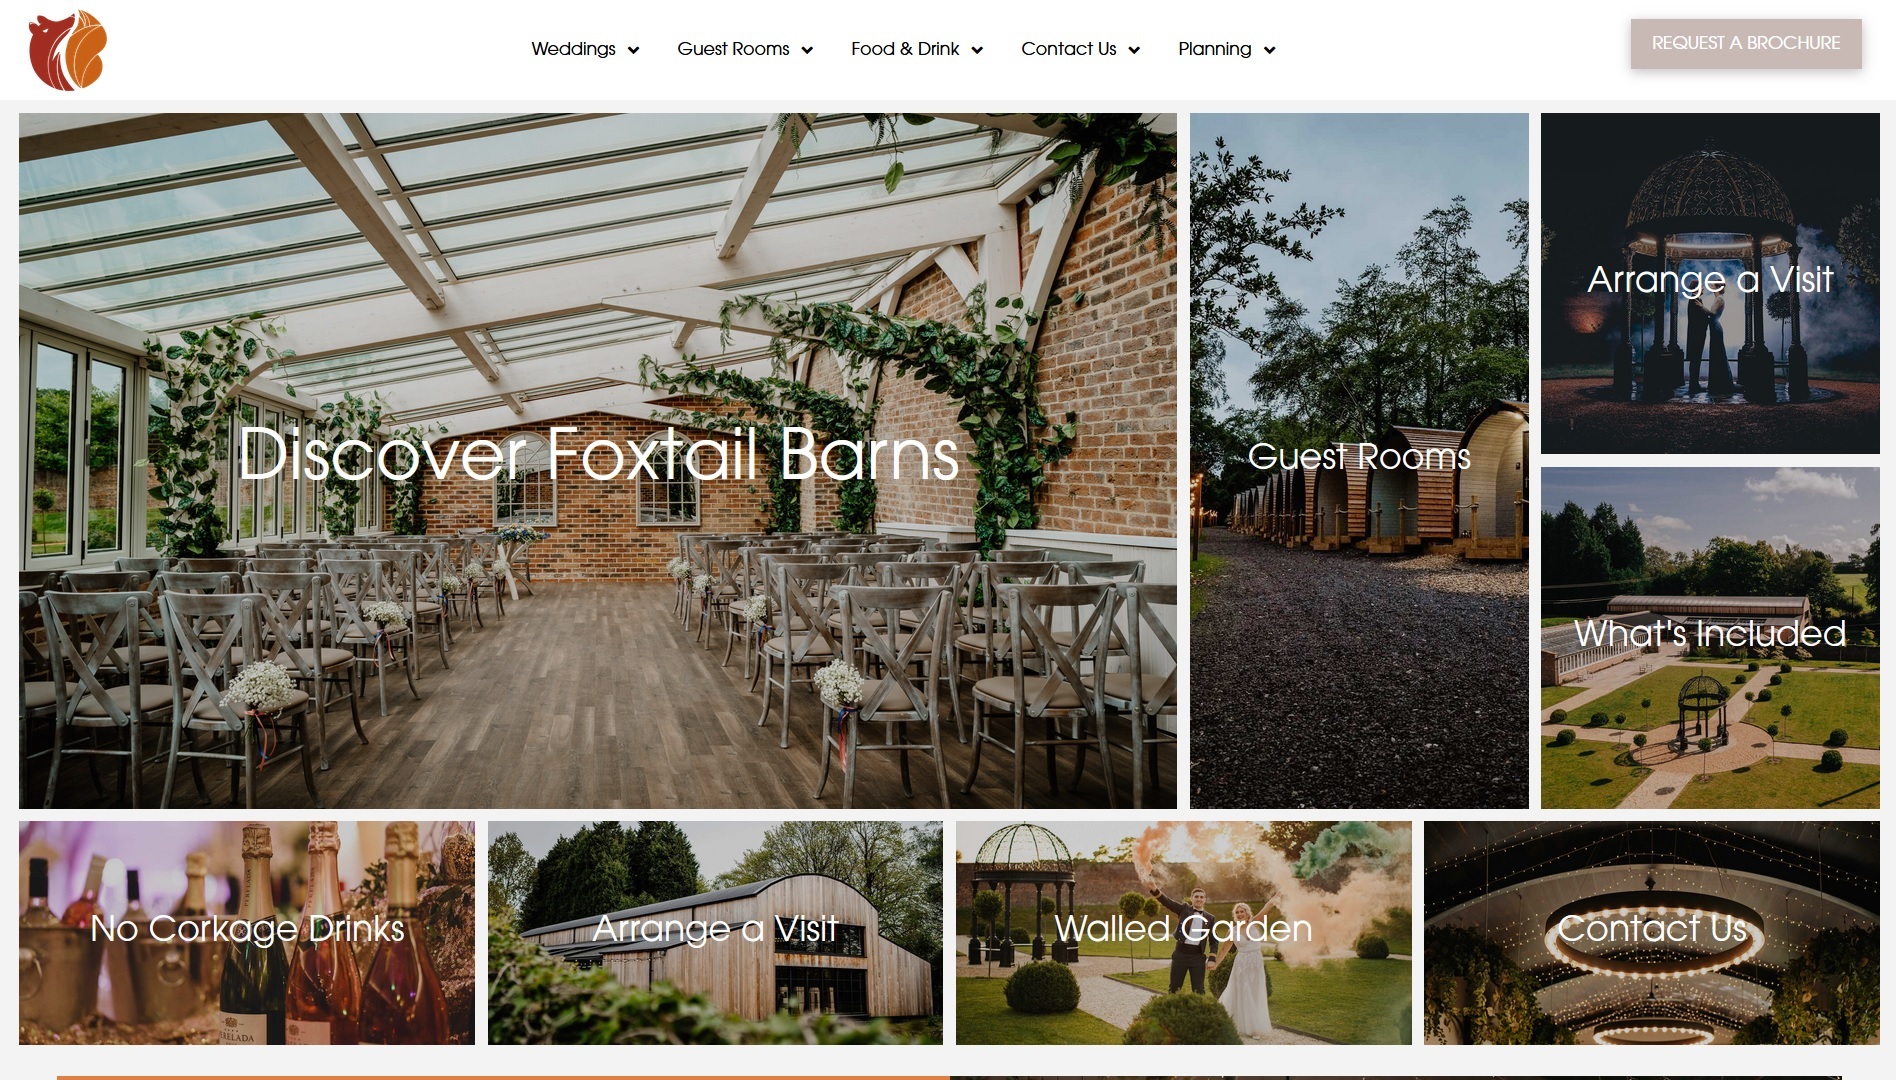 image of the Foxtail Barns website